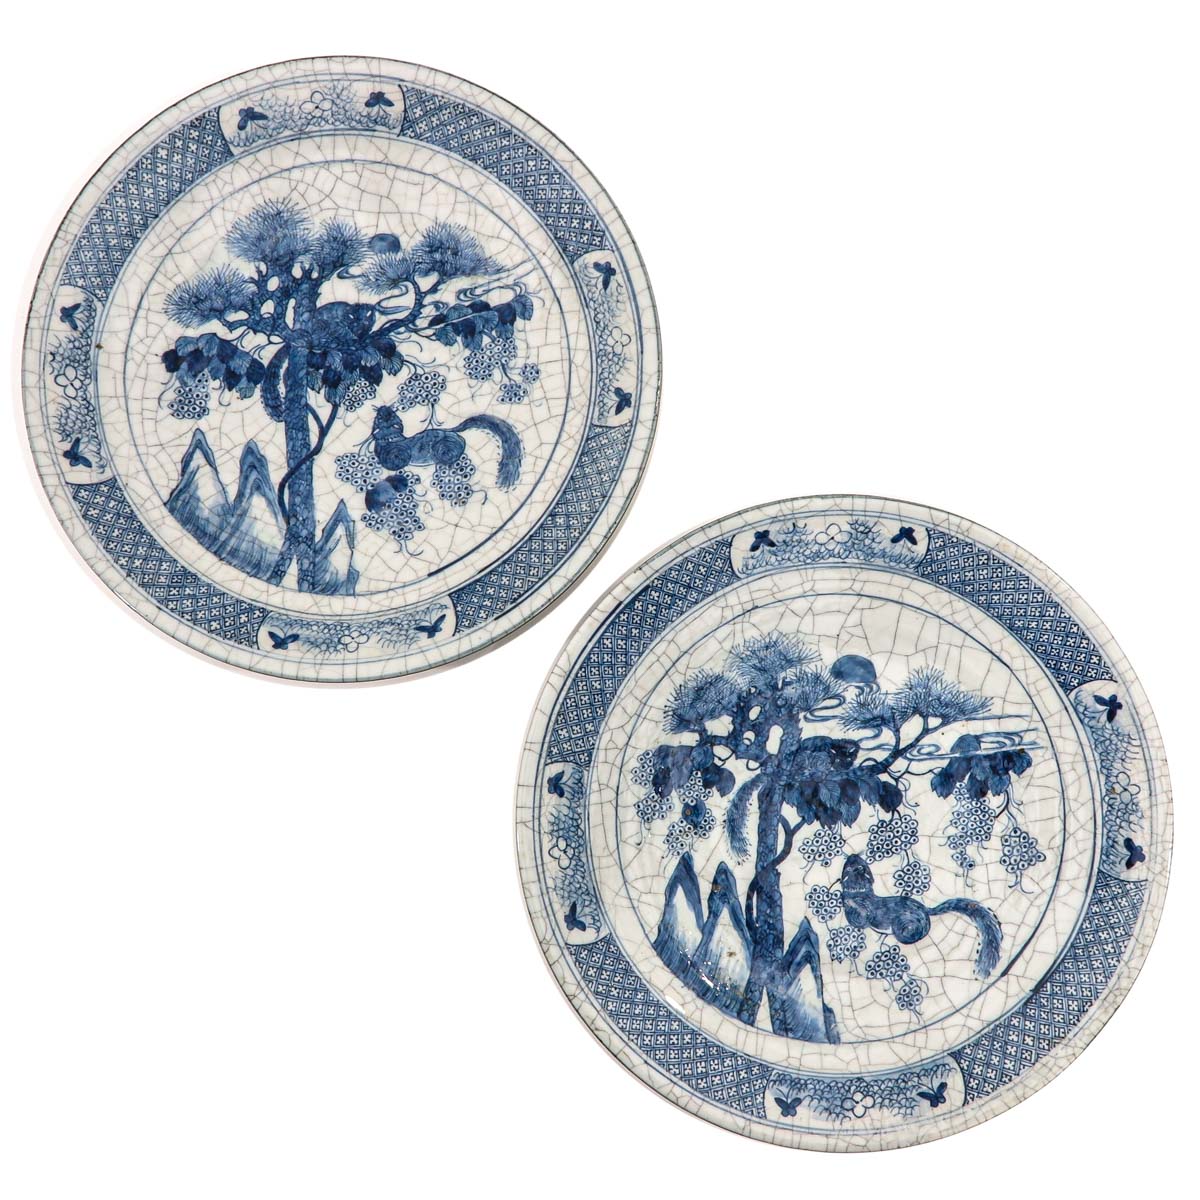 A Pair of Blue and White Chargers